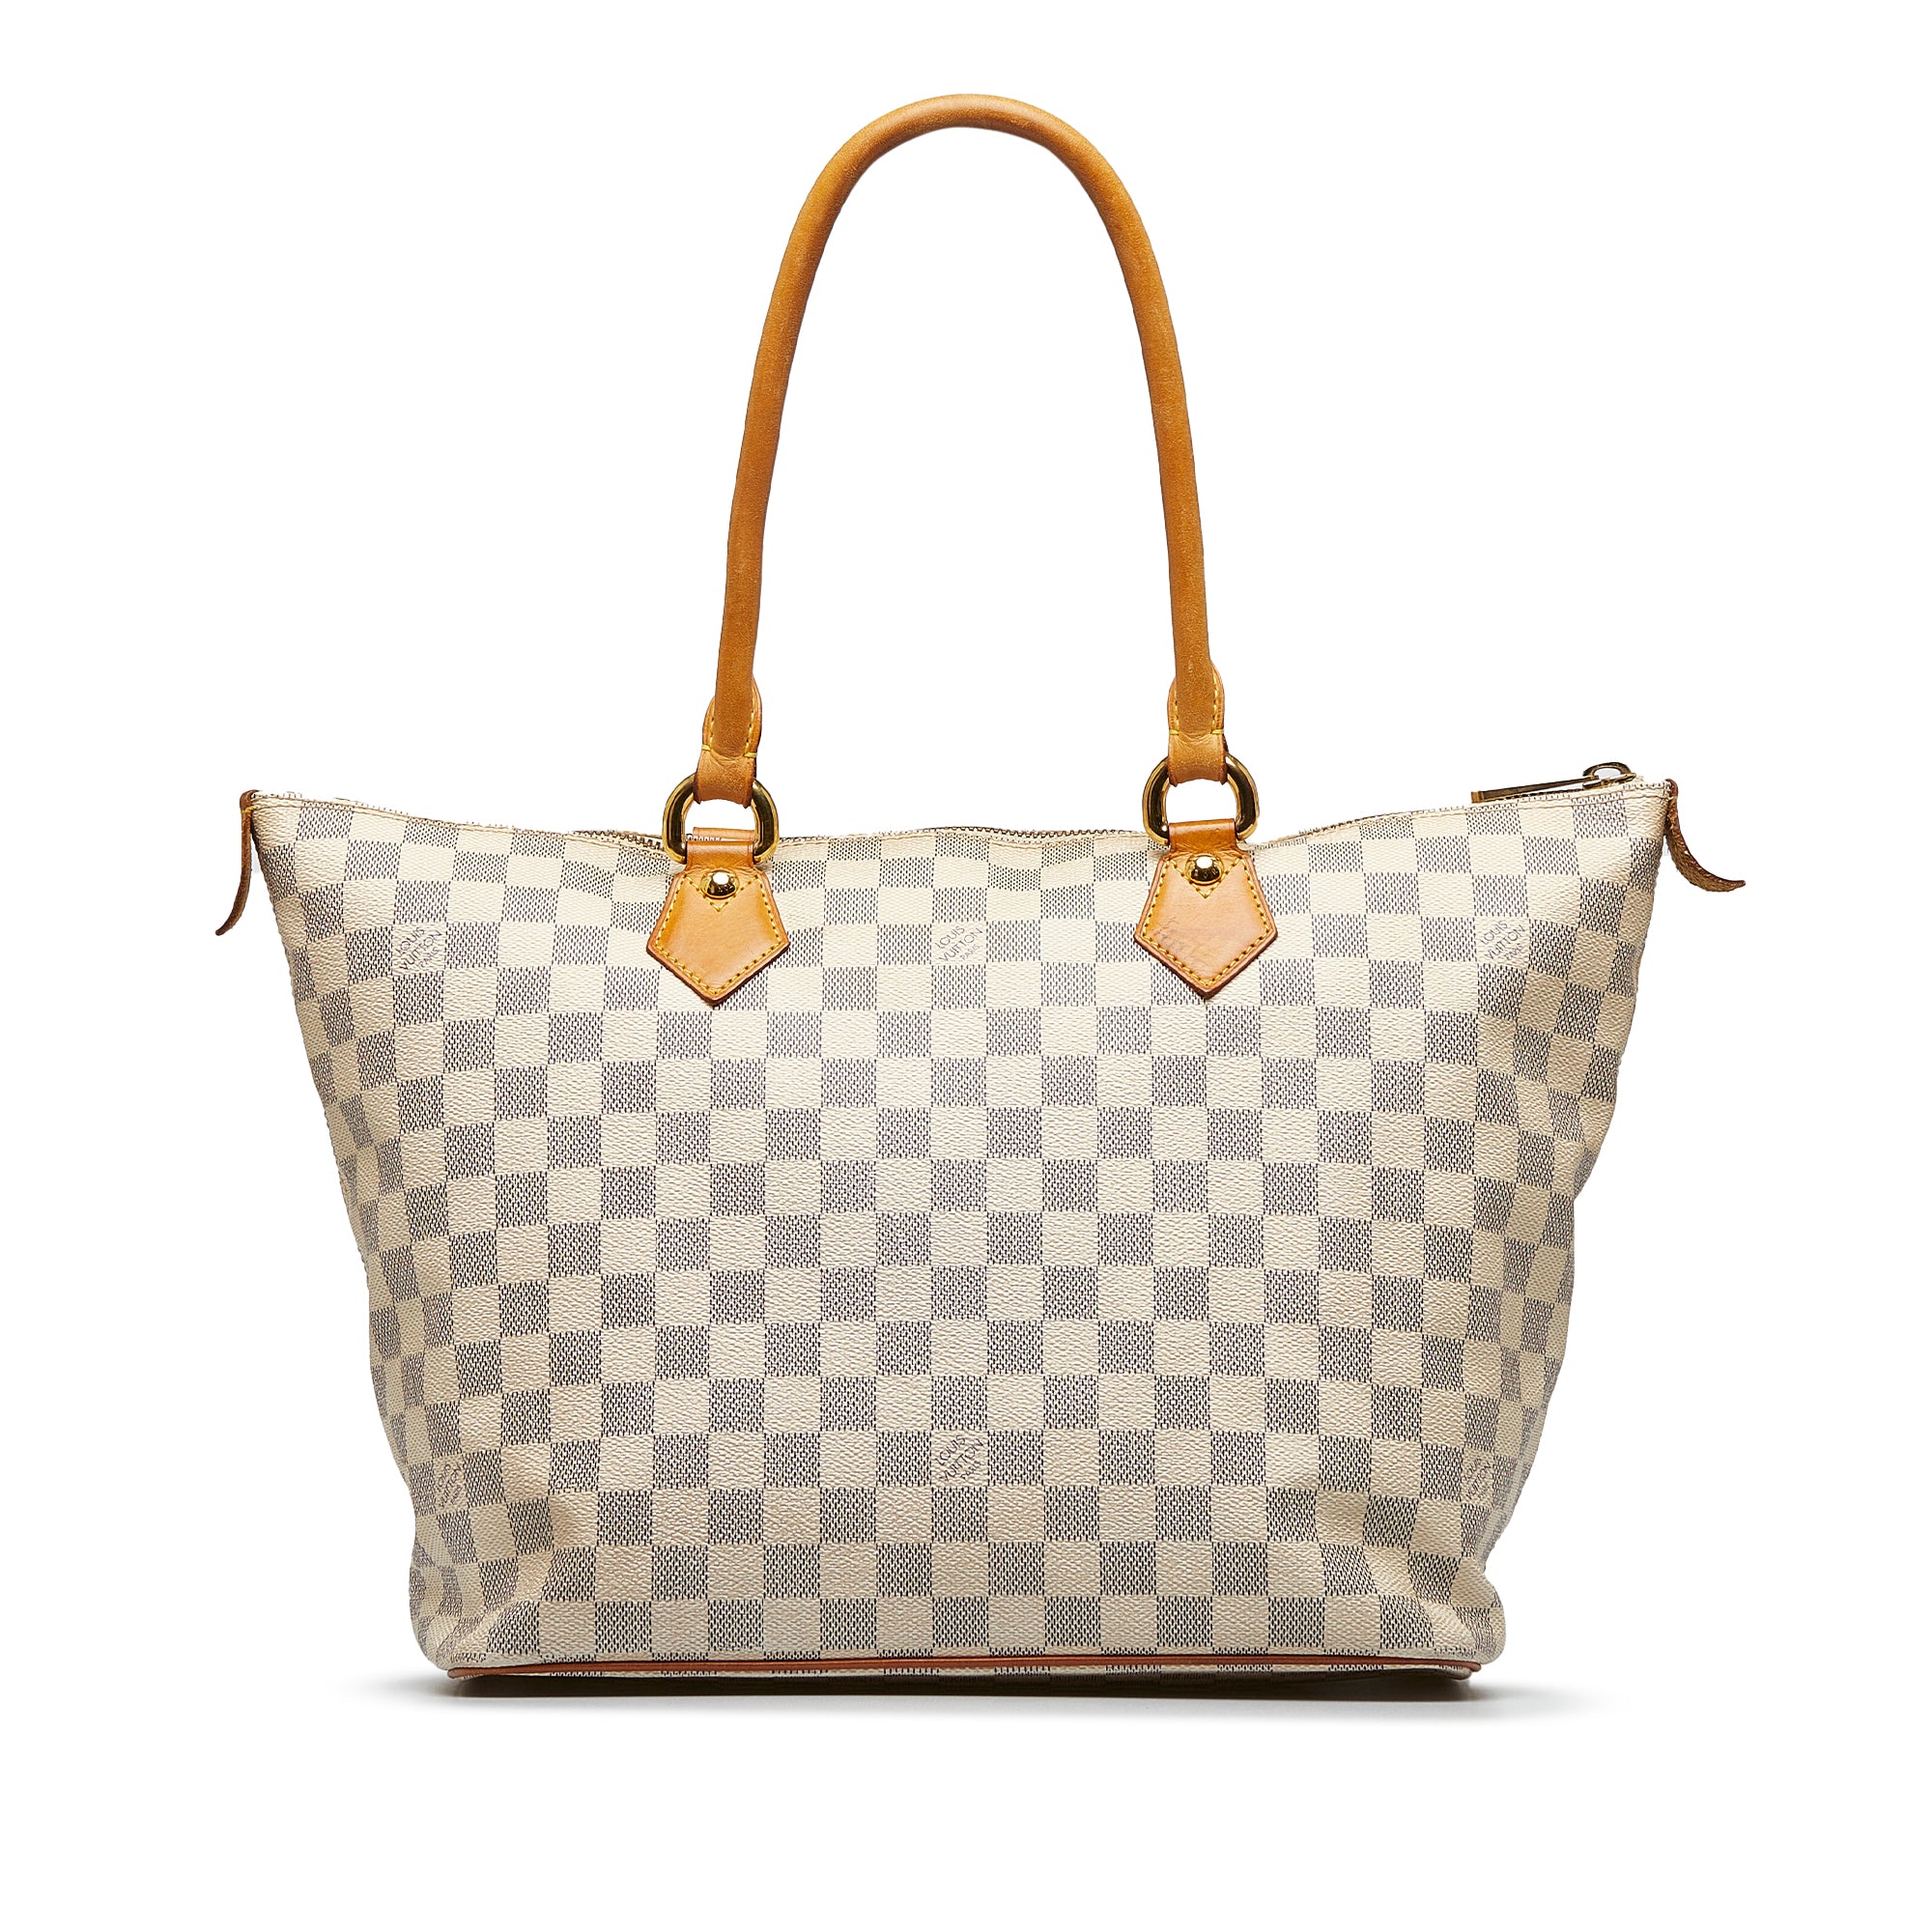 LV NEVERFULL GM vs MARC JACOBS LARGE TOTE BAG, SIDE BY SIDE COMPARISON 